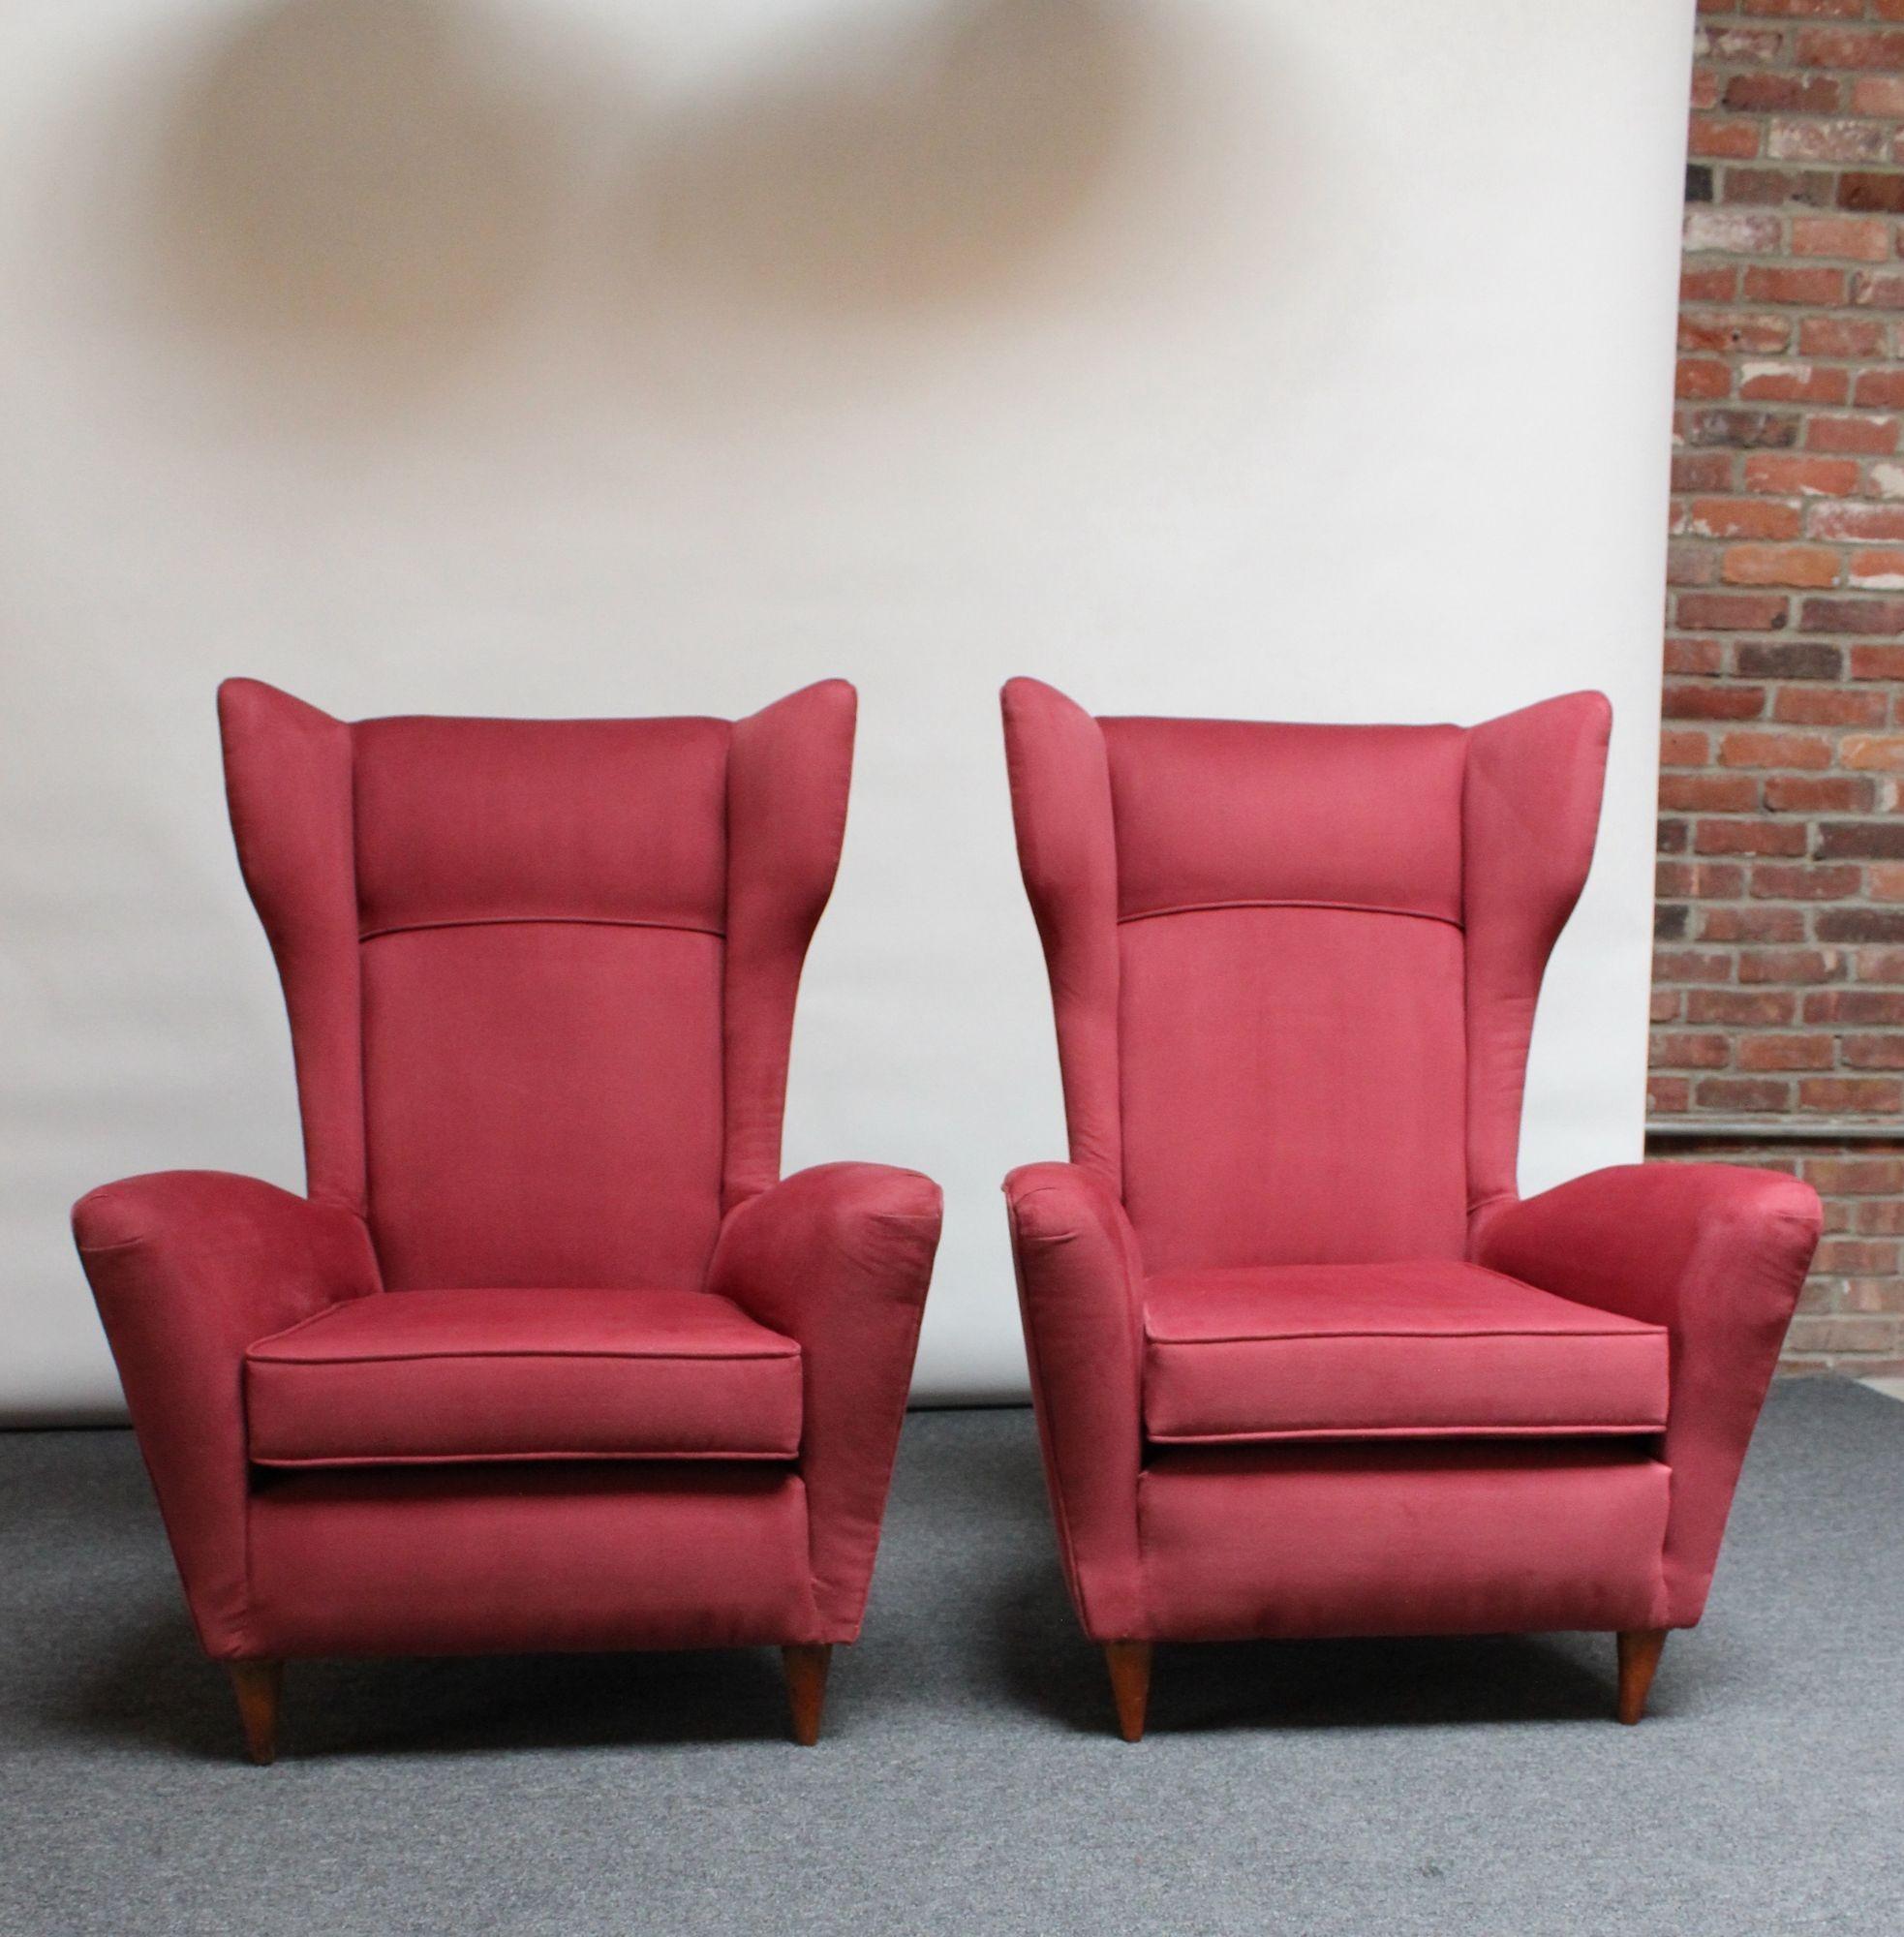 Pair of Italian Modernist Wingback Lounge Chairs by Ico Parisi In Good Condition For Sale In Brooklyn, NY